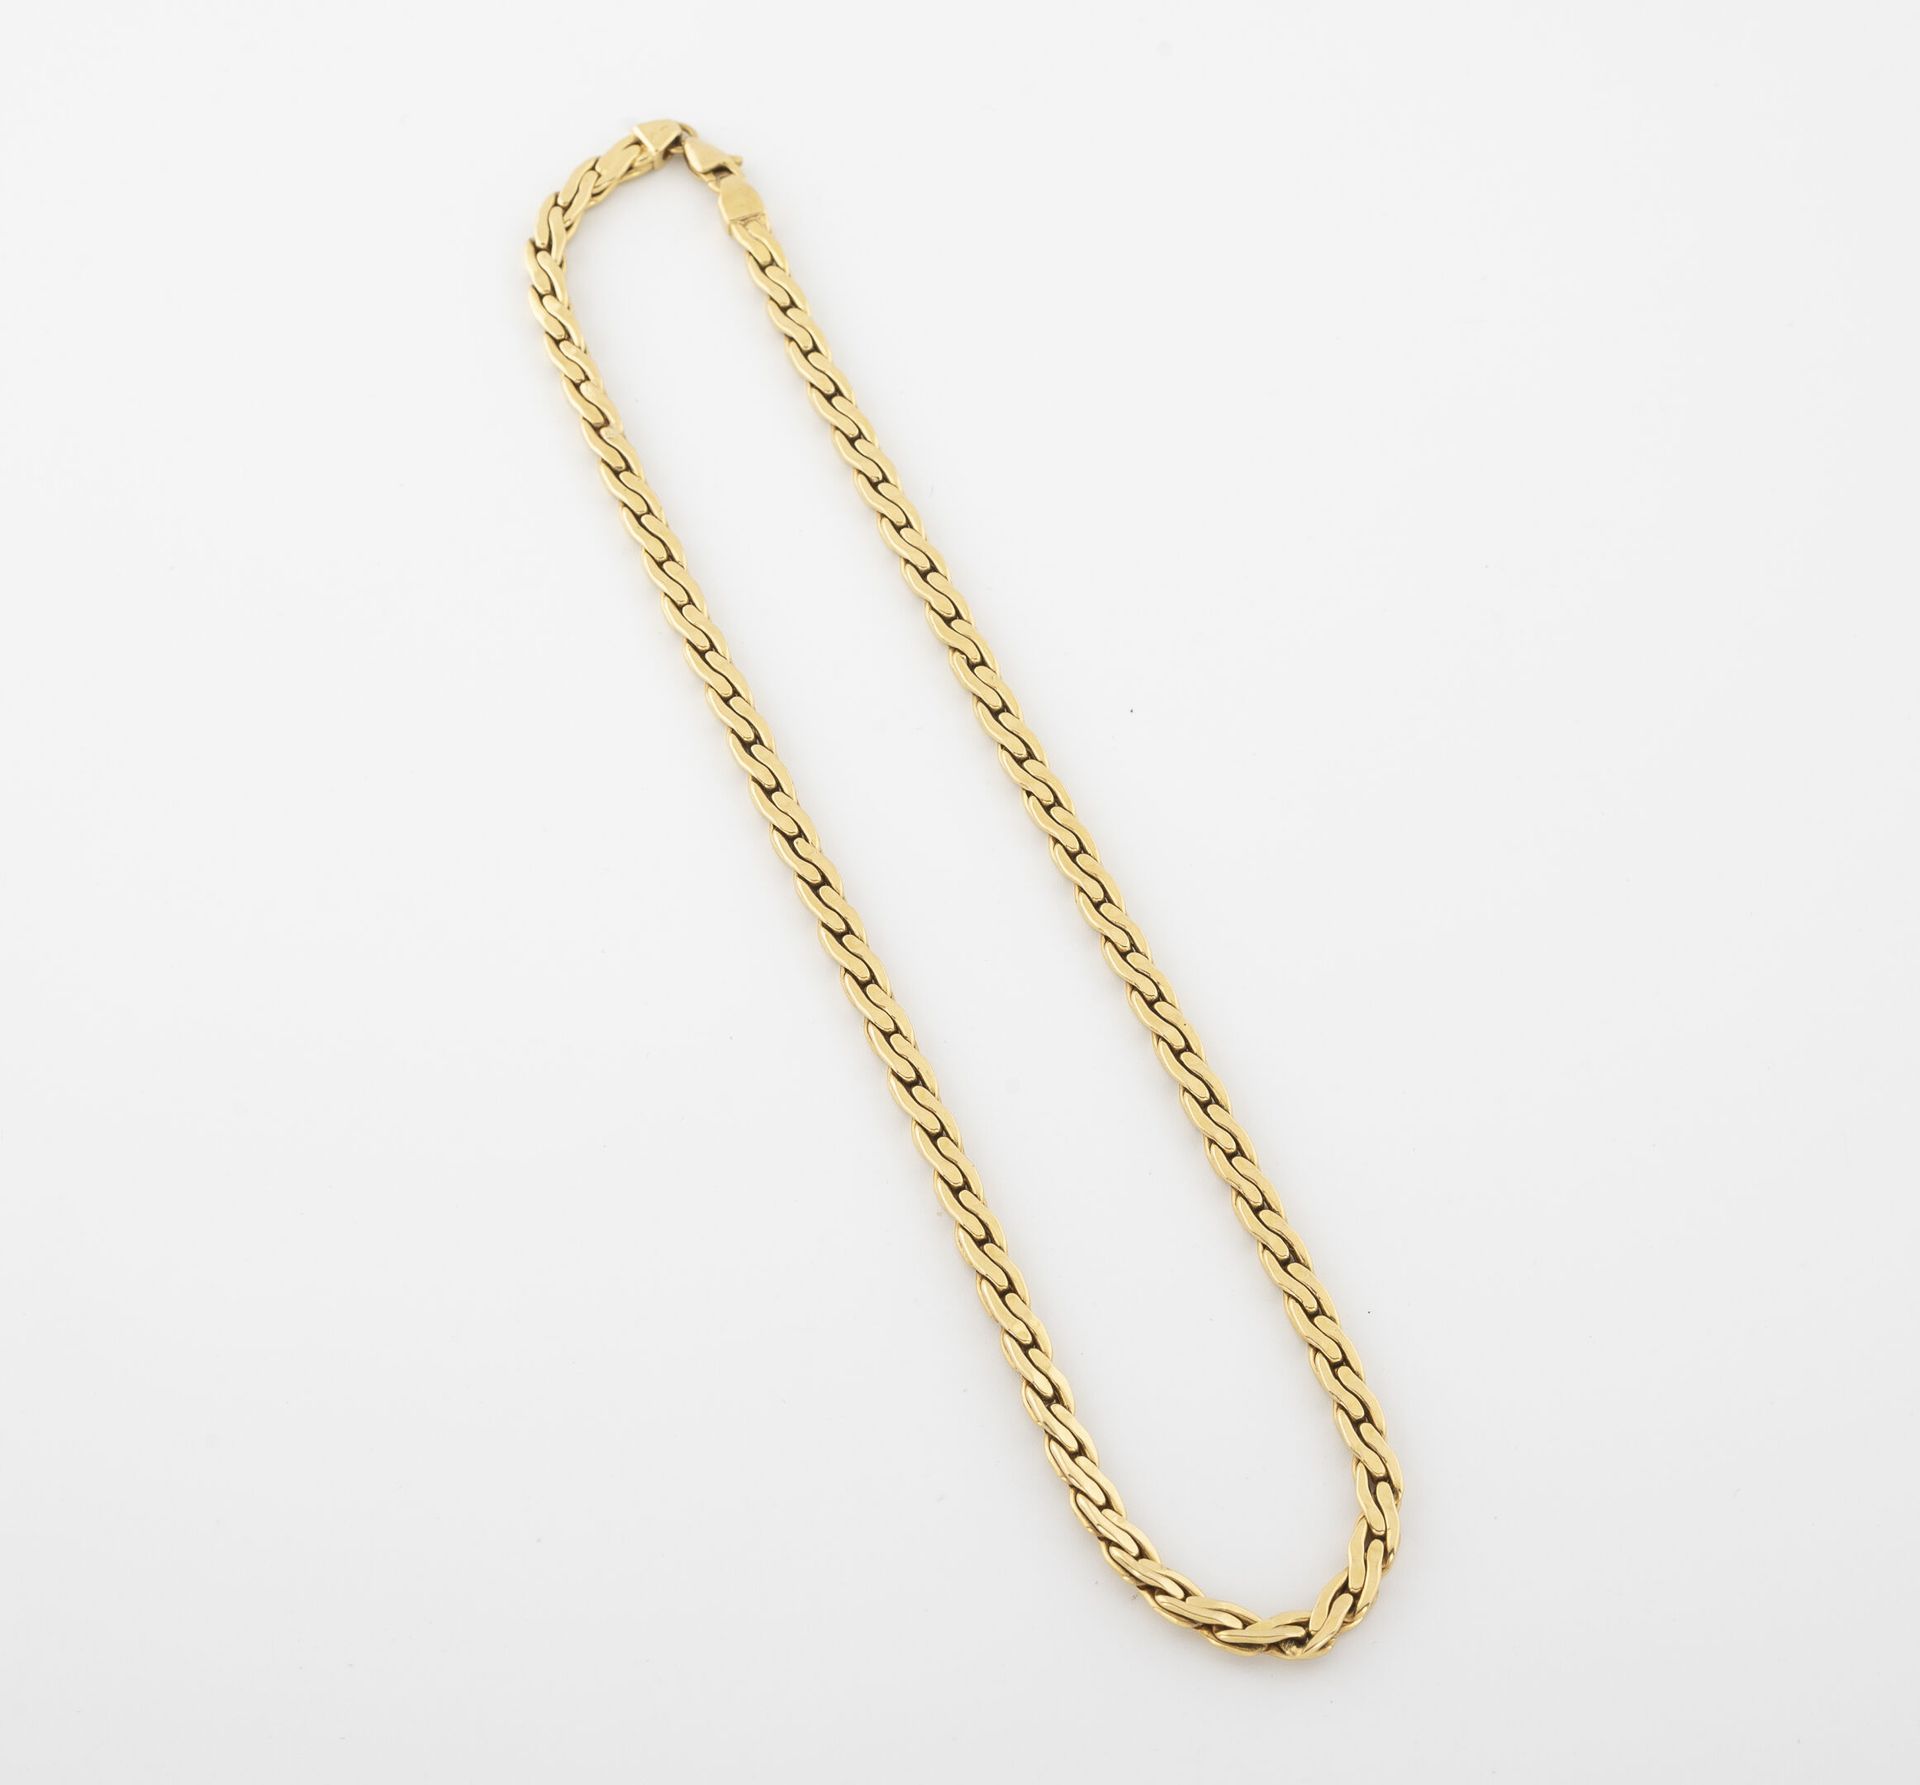 Null Yellow gold (750) necklace with flattened curb chain links. 

Snap hook cla&hellip;